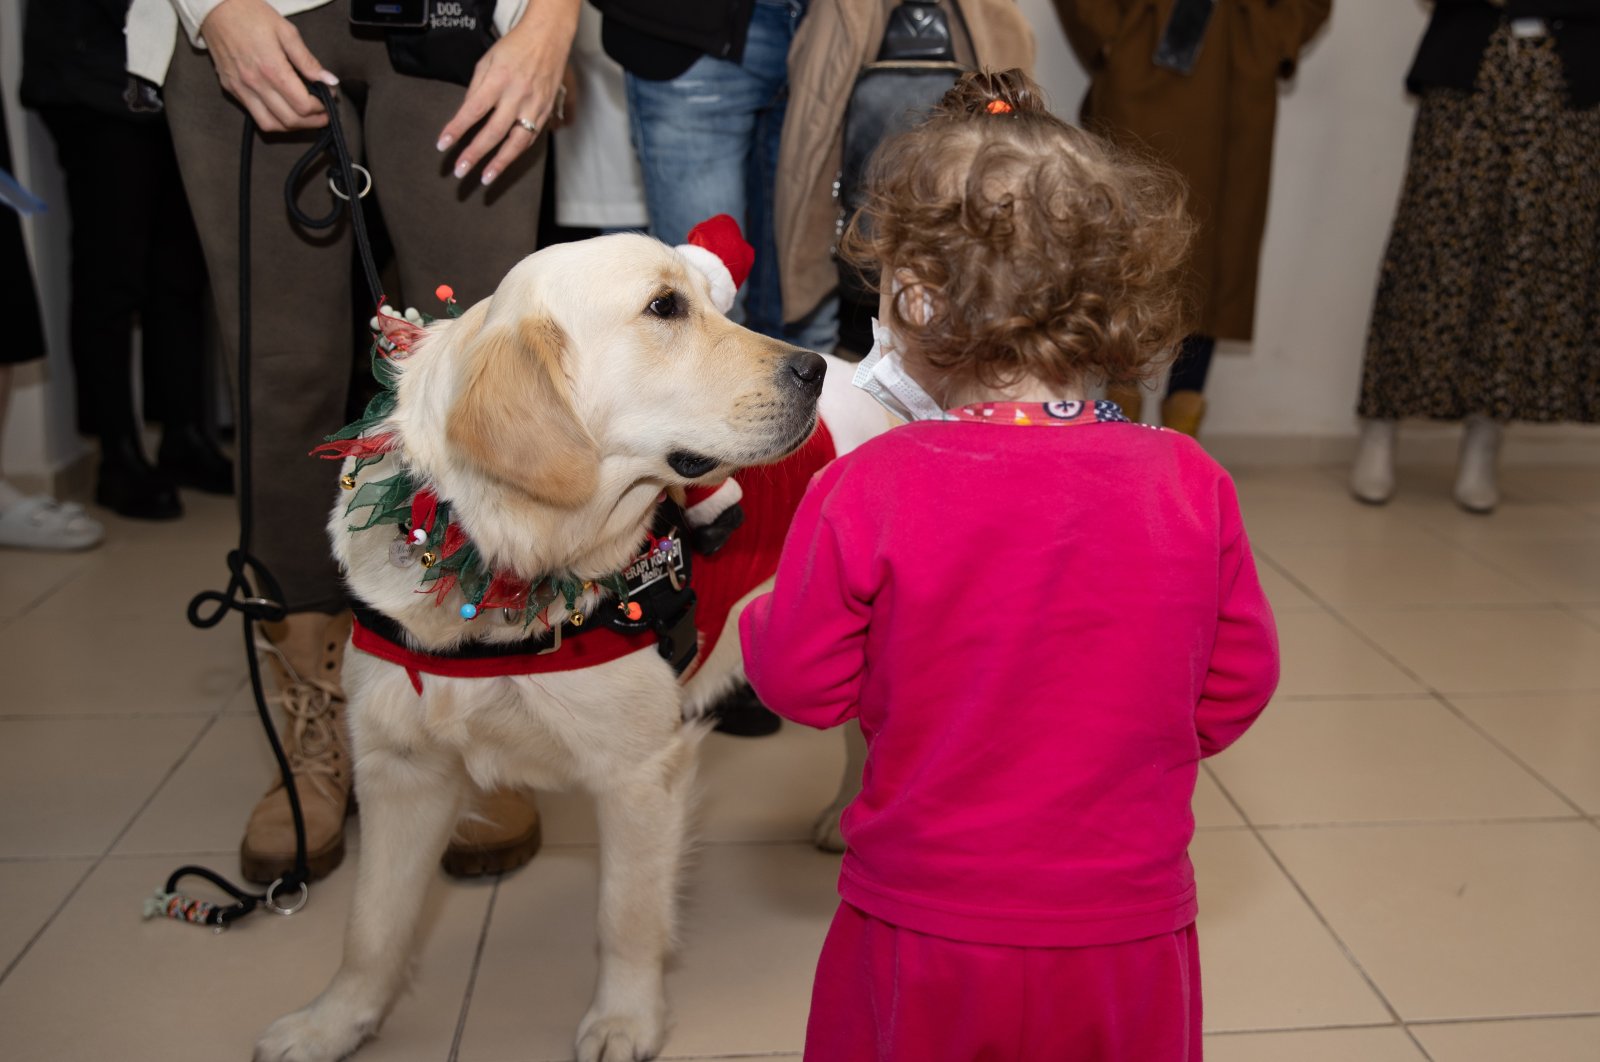 Therapy dog lifts spirits of kids in cancer treatment